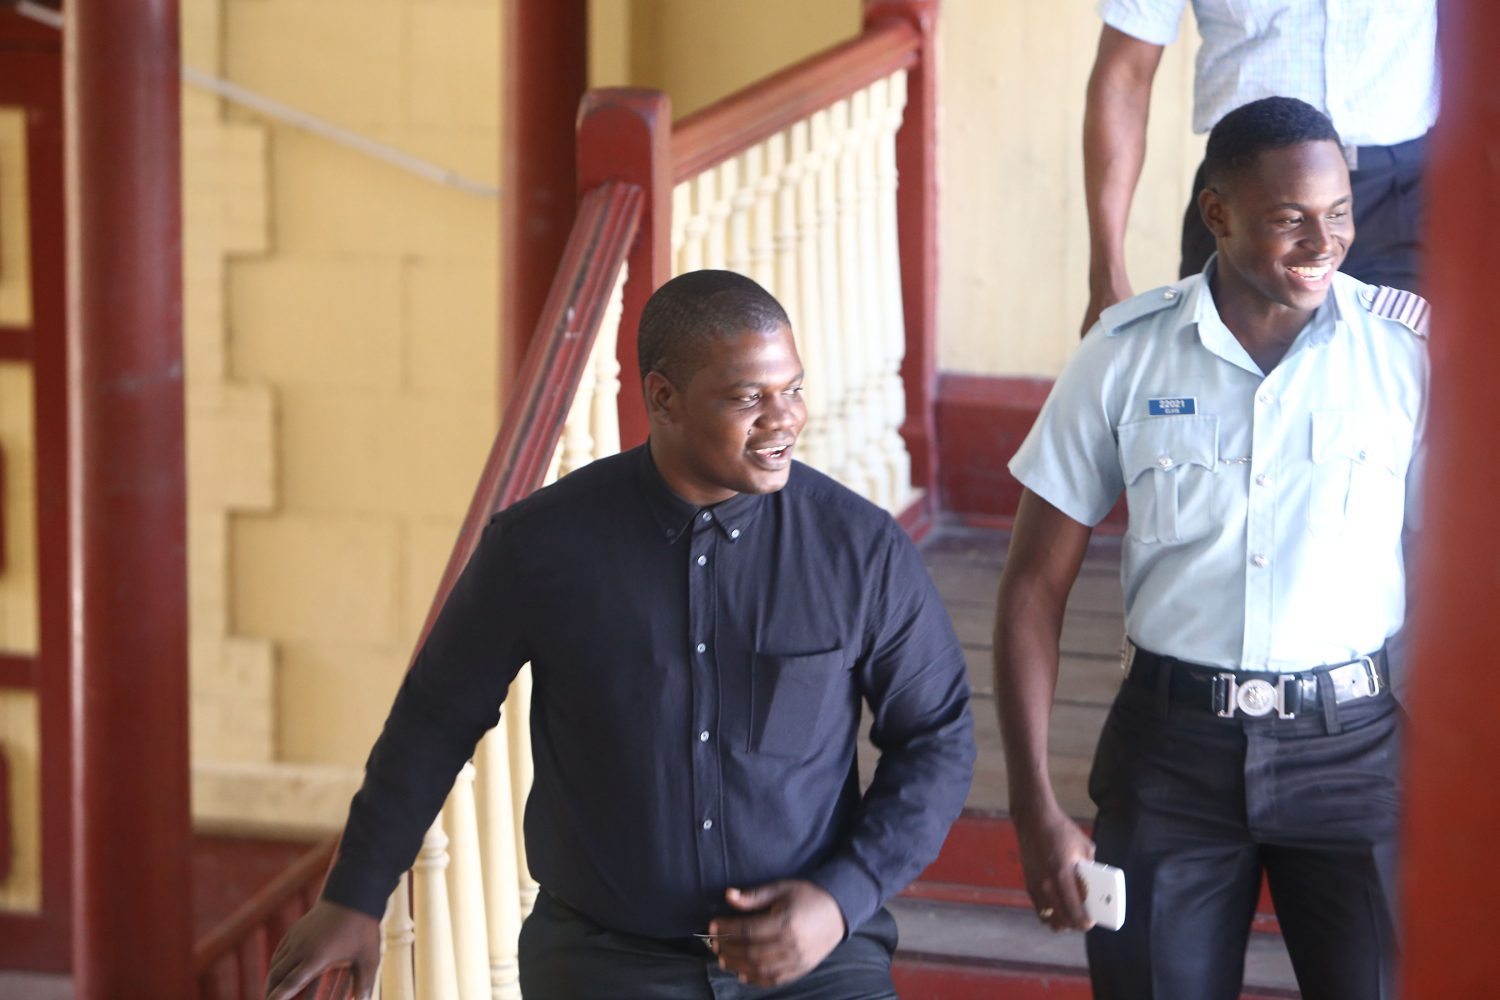 GDF rank Zamani Archibald (at left) as he proceeded down the court’s stairway, without handcuffs, in the company of an officer.
